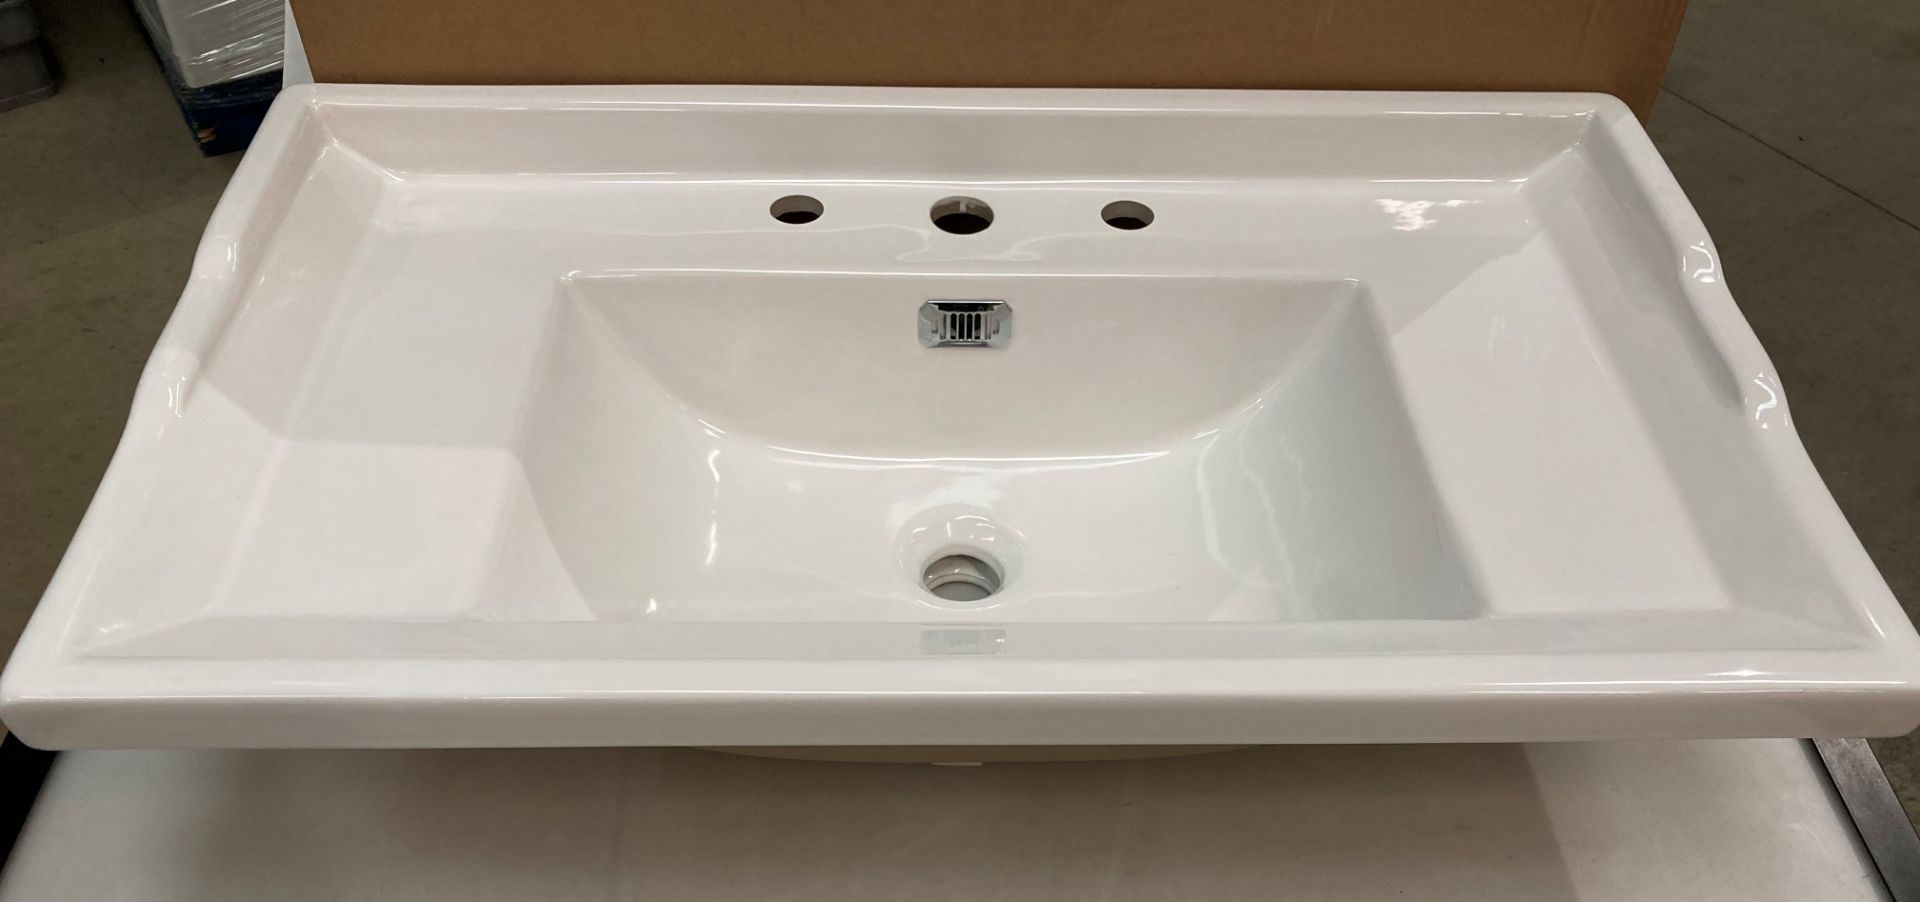 3 x 800mm traditional basin 3T/H size 820mm x 480mm x 220mm